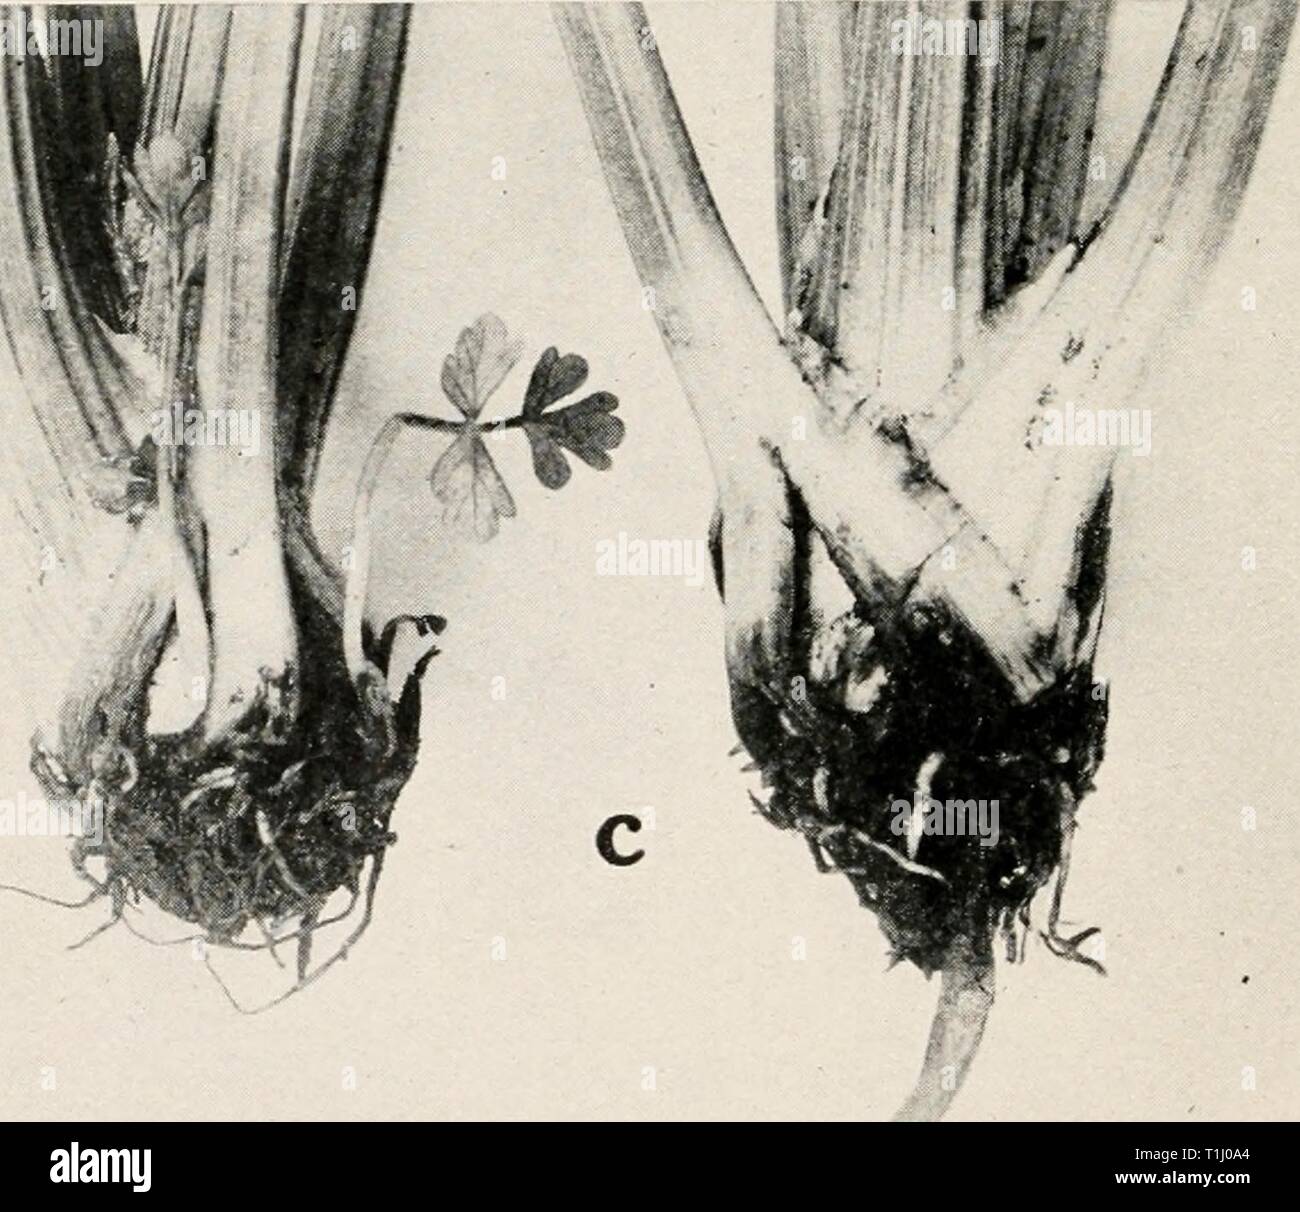 Diseases of truck crops and Diseases of truck crops and their control  diseasesoftruckc00taubuoft Year: [1918]  Fig. 70. Celery Diseases. a. Cercospora leaf spot, h. conidiophores and conidia of Cercospo (afterDuggar and Baily), c. Rhizoctonia root rot. Stock Photo